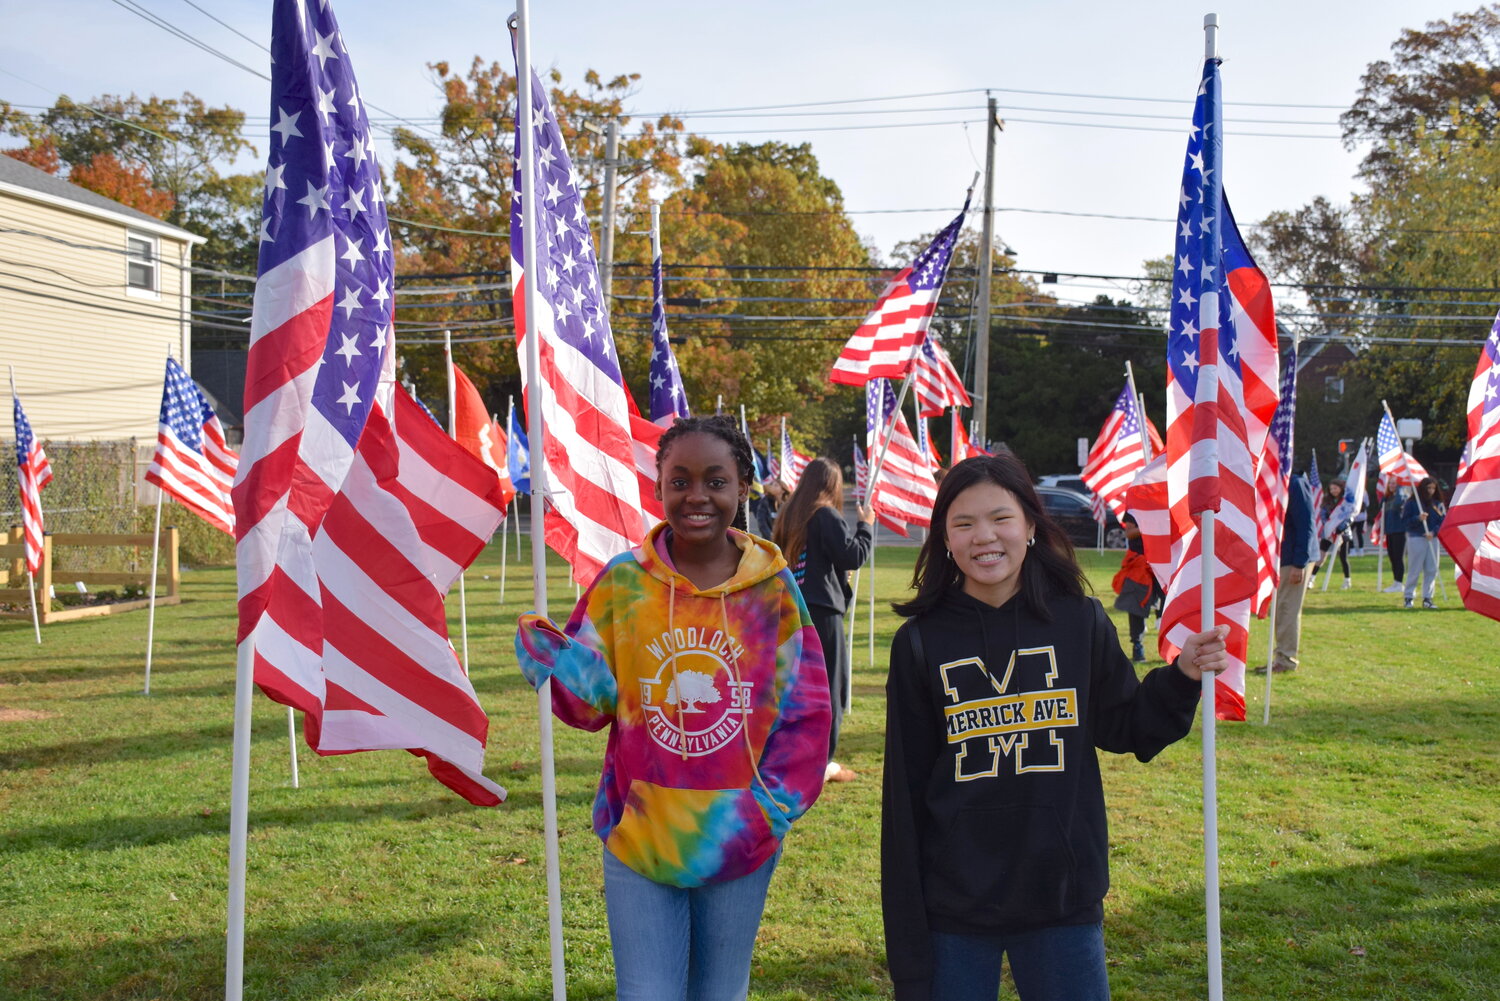 Dariella Mauricette and Jiana Tomasello worked together to install flags in the ground.